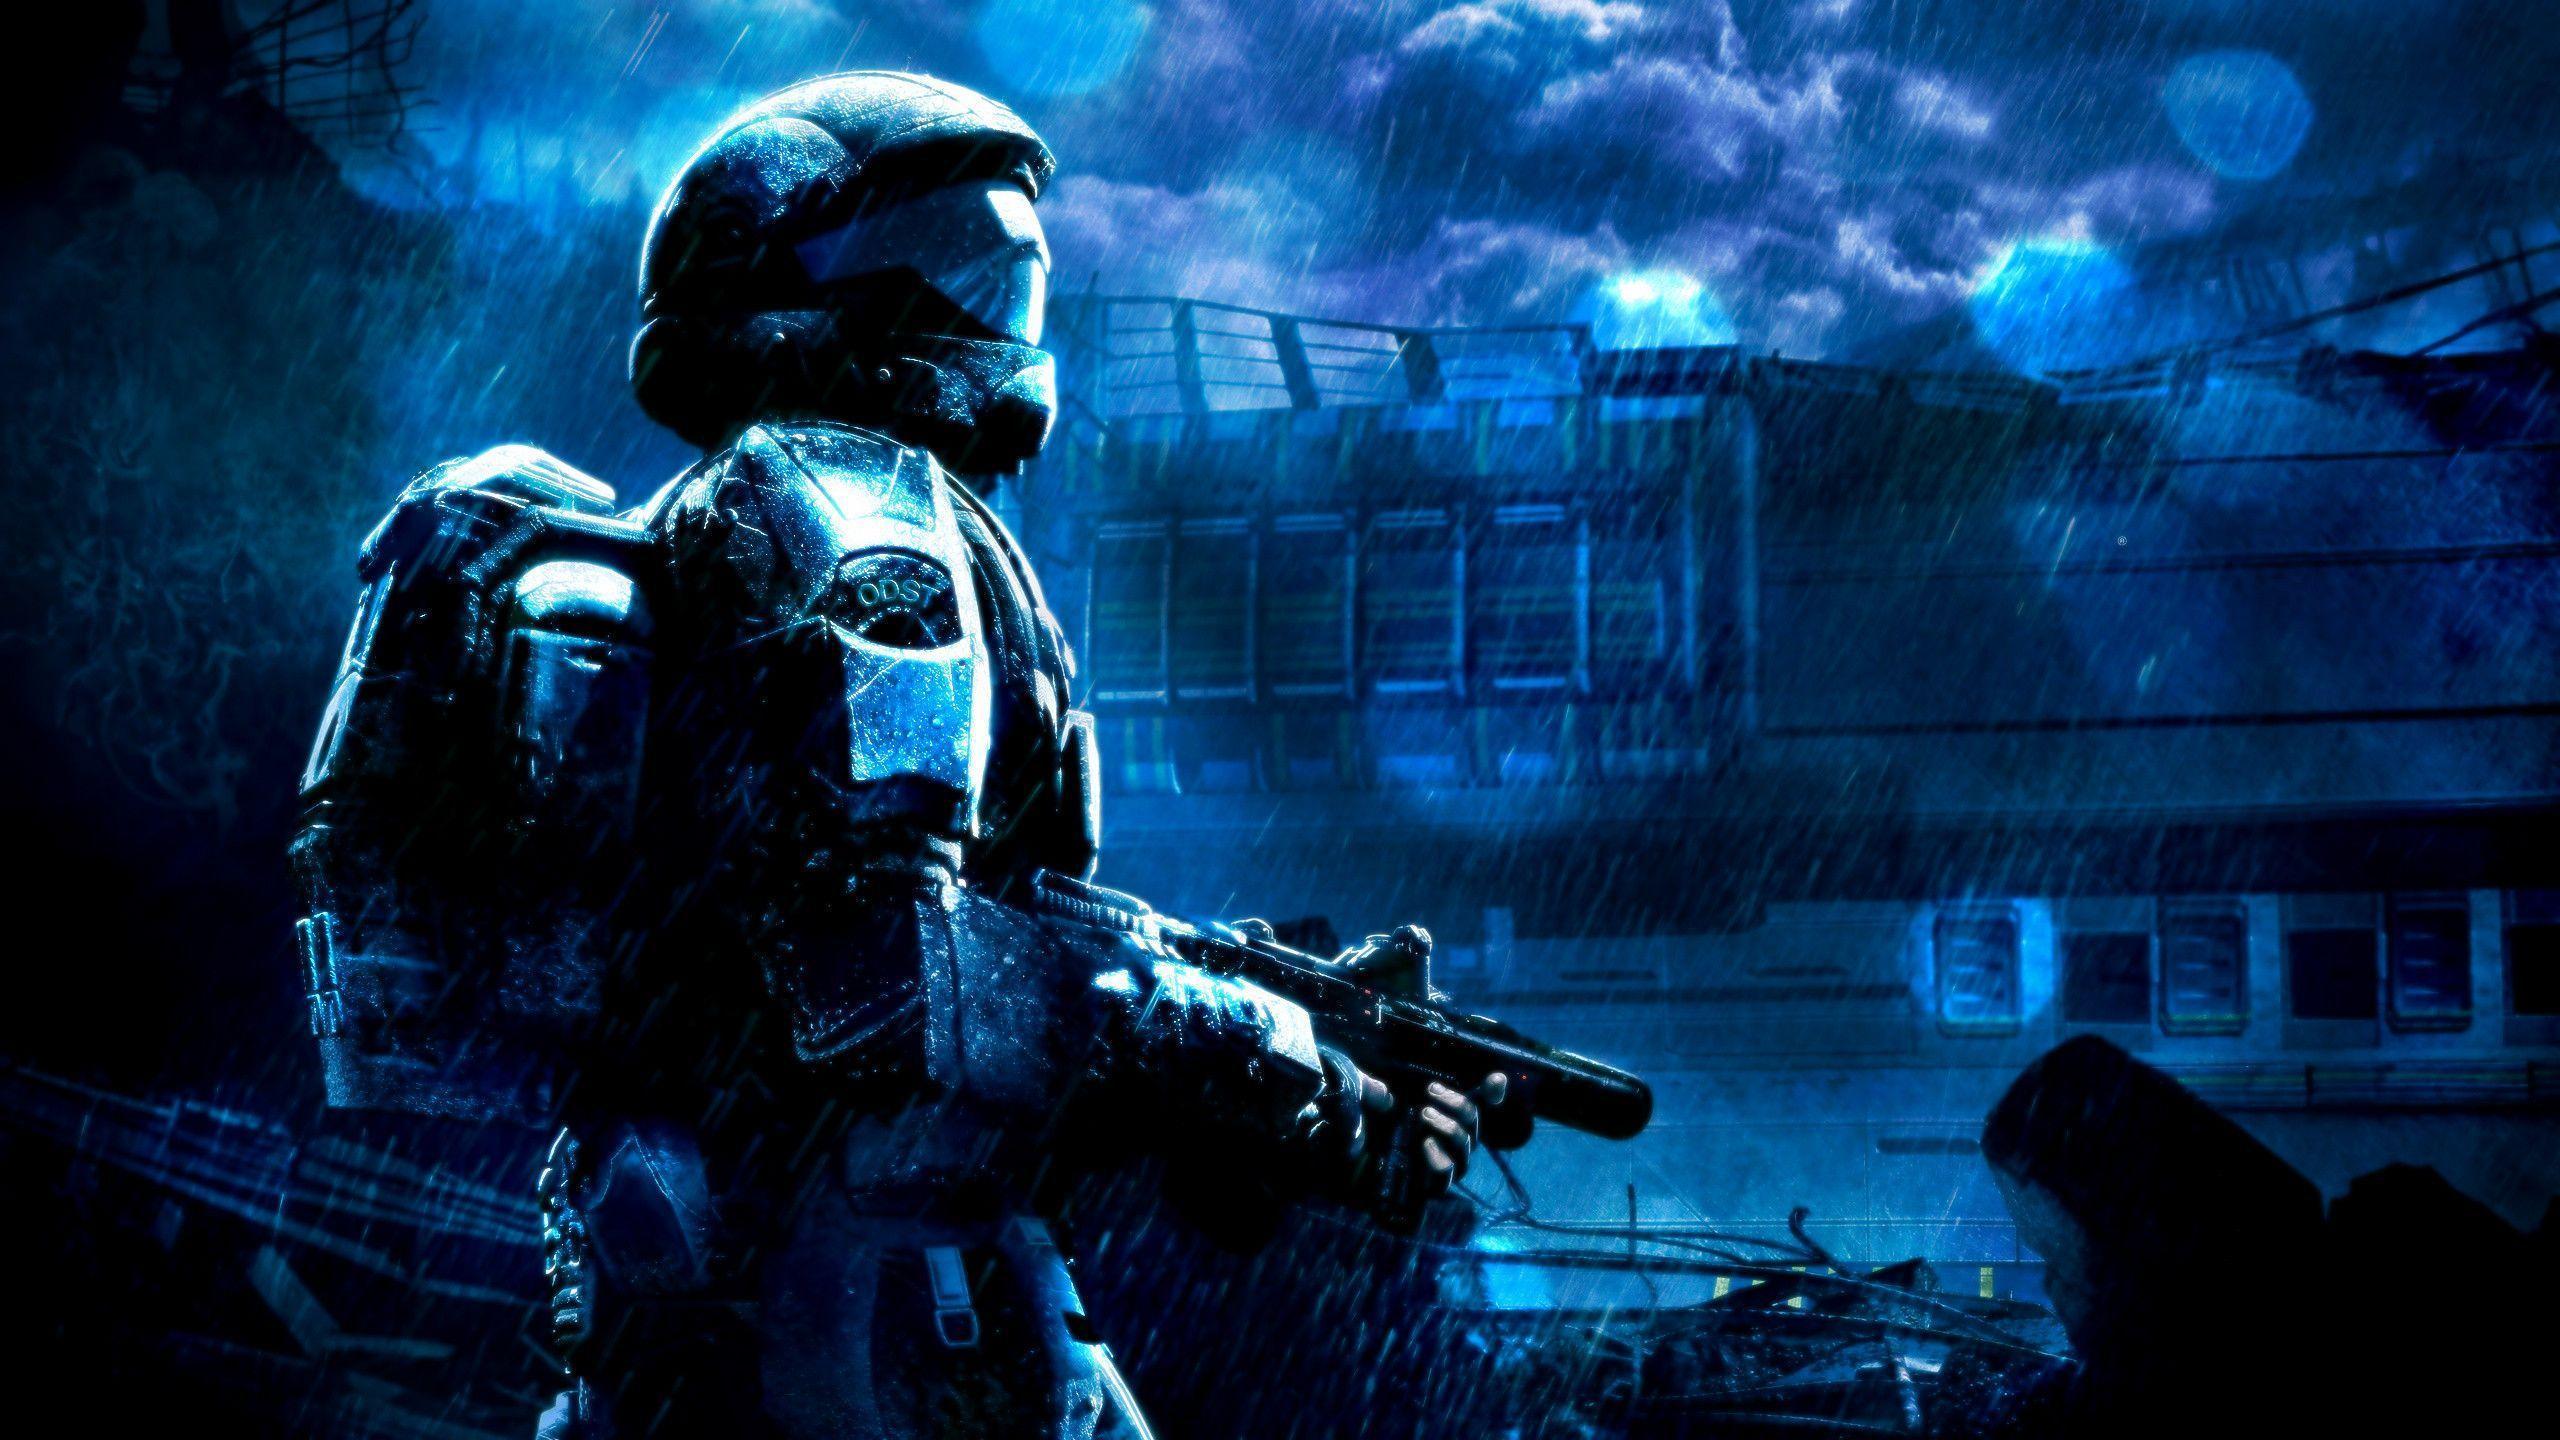 5 Halo 3: Odst Wallpapers